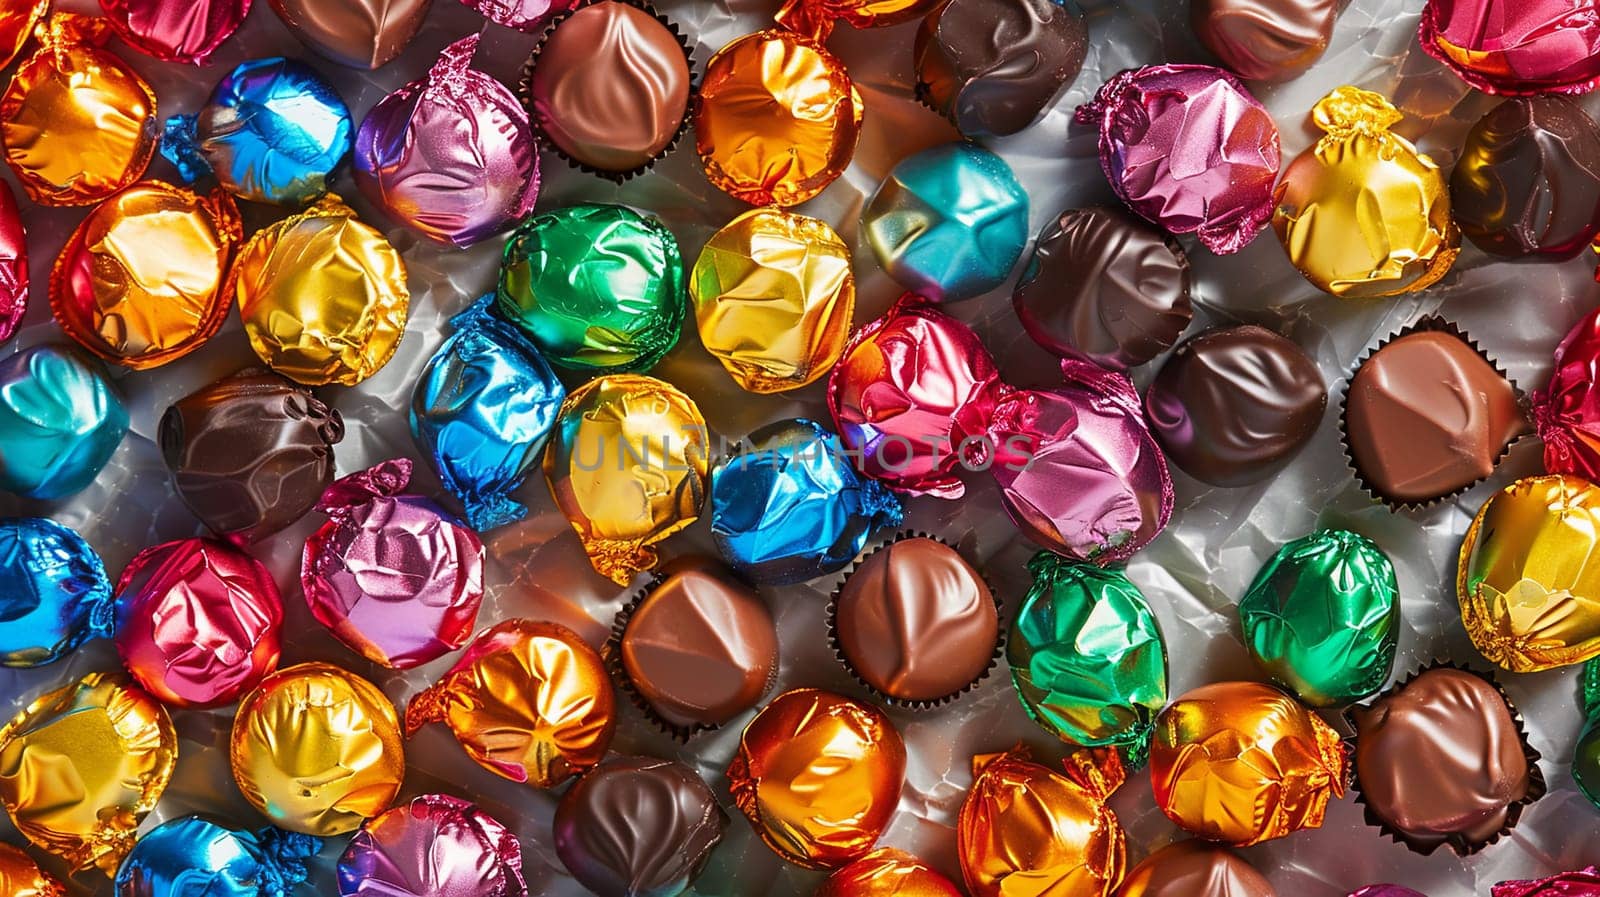 Close up view of vibrant and shiny assorted chocolates in various colors spread out.